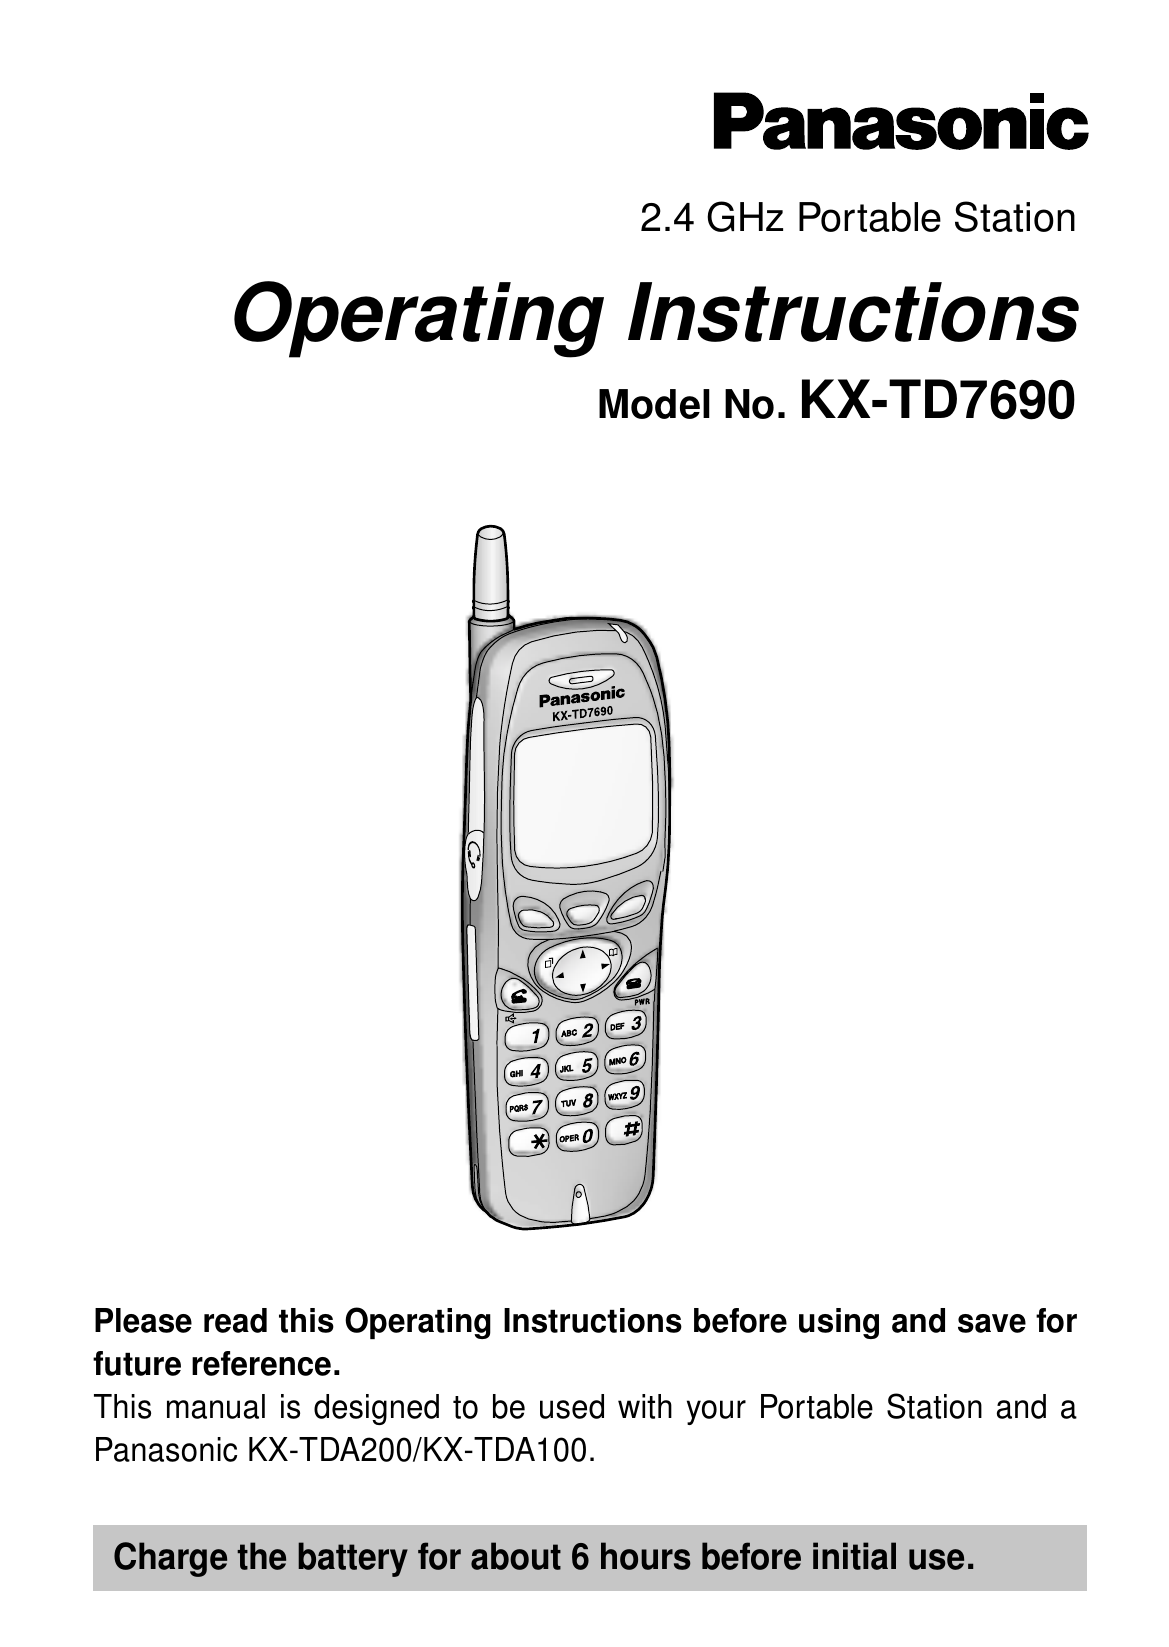 Please read this Operating Instructions before using and save forfuture reference.This manual is designed to be used with your Portable Station and aPanasonic KX-TDA200/KX-TDA100.Charge the battery for about 6 hours before initial use.2.4 GHz Portable StationOperating InstructionsModel No. KX-TD7690